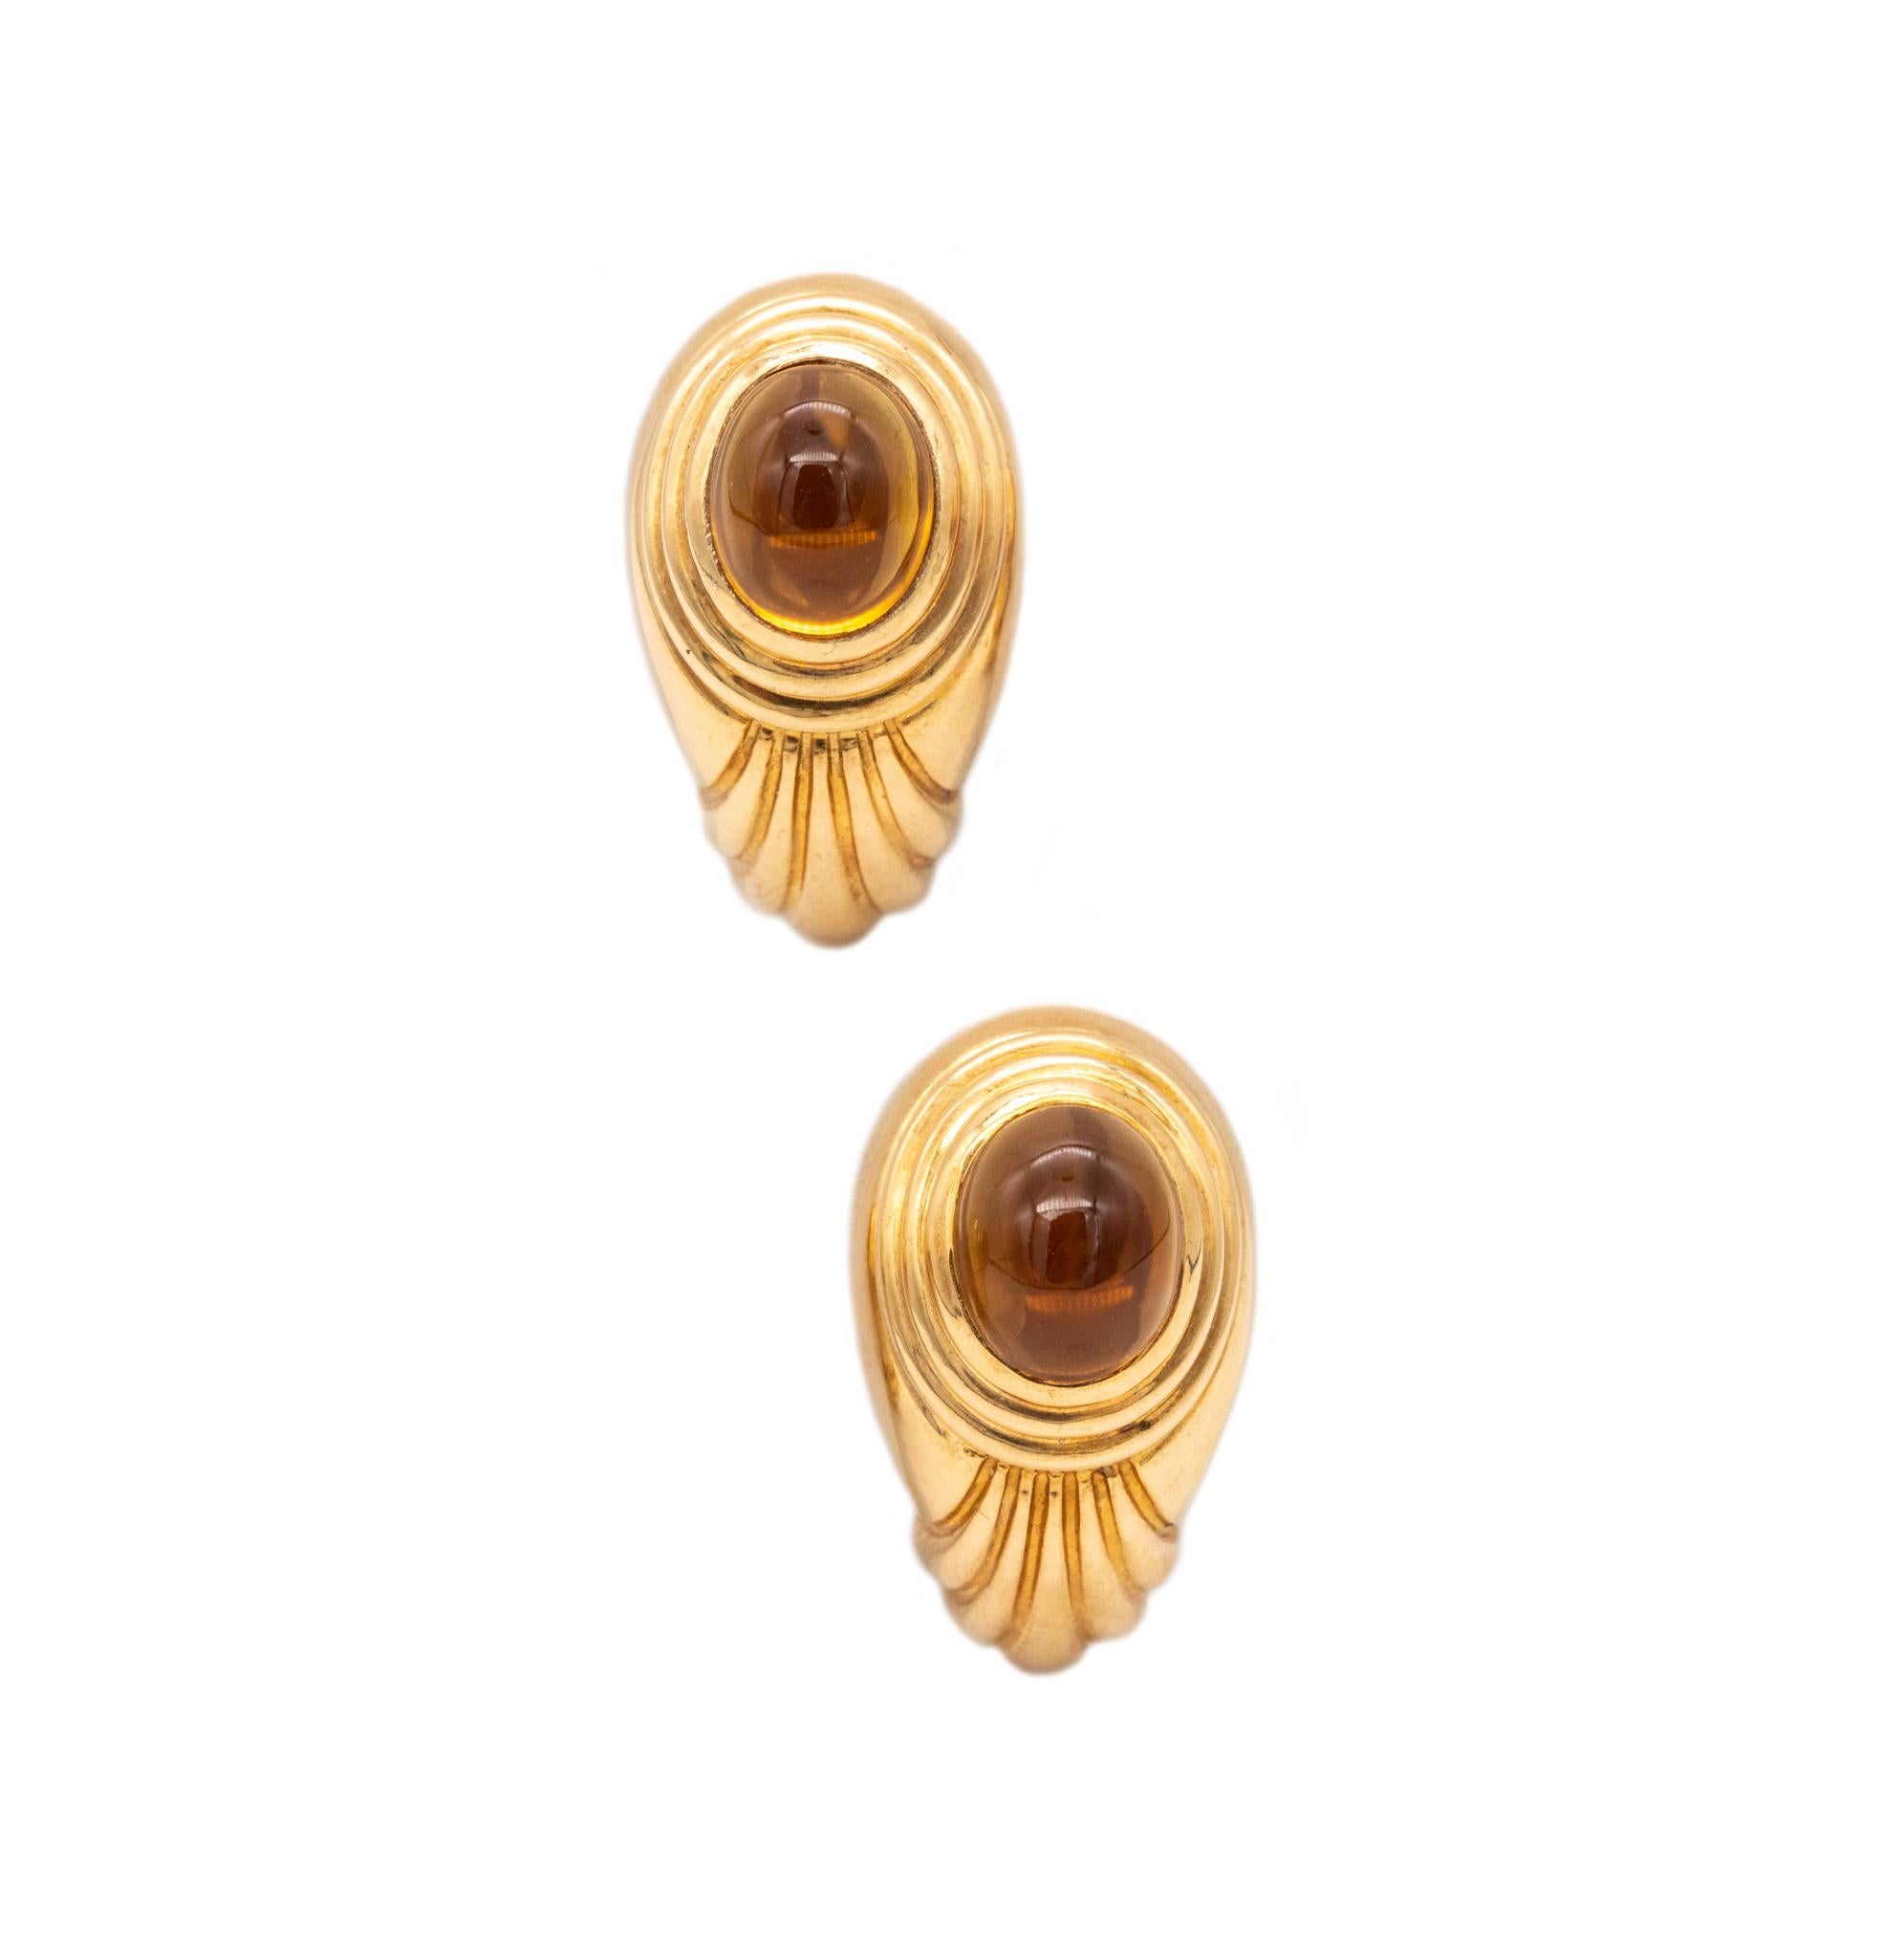 Jaipur ear-clips earrings designed by Boucheron.

A classic pair of earrings crafted by the house of Boucheron in Paris France in solid 18 karats yellow gold with deco patterns. Suited with omega backs for fastening clips and the post's option for